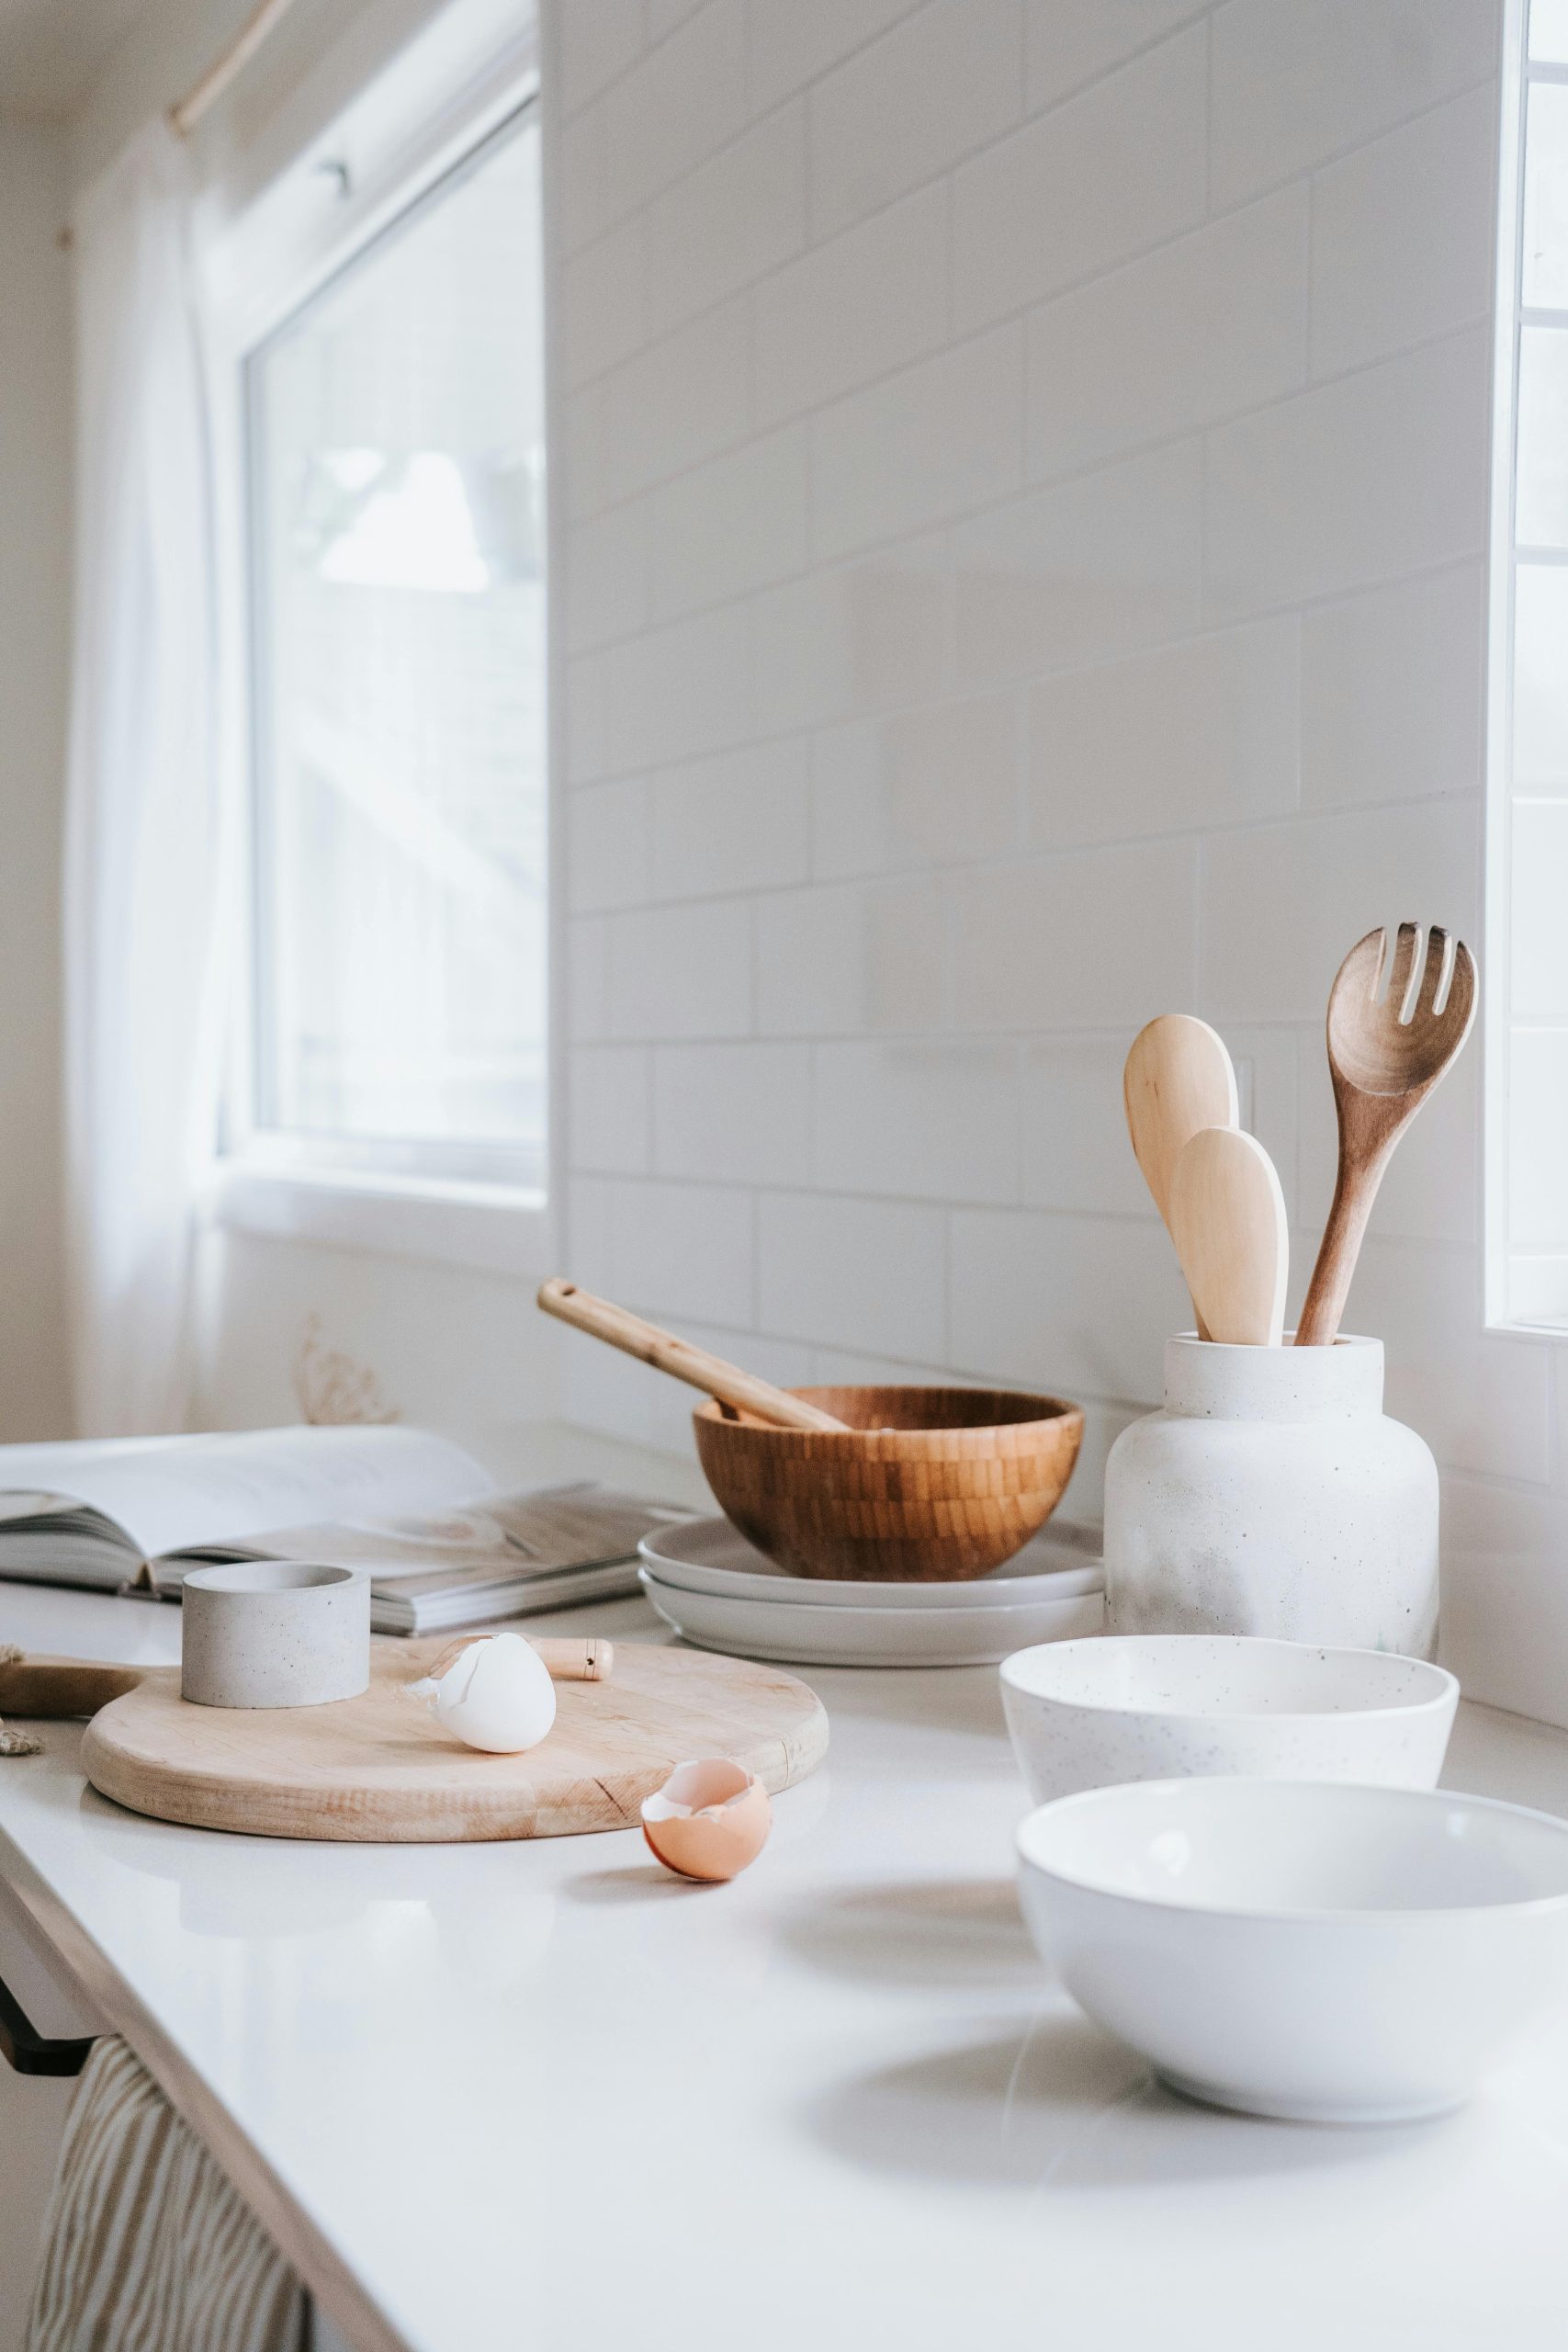 Choosing the Right Countertop for Your Home